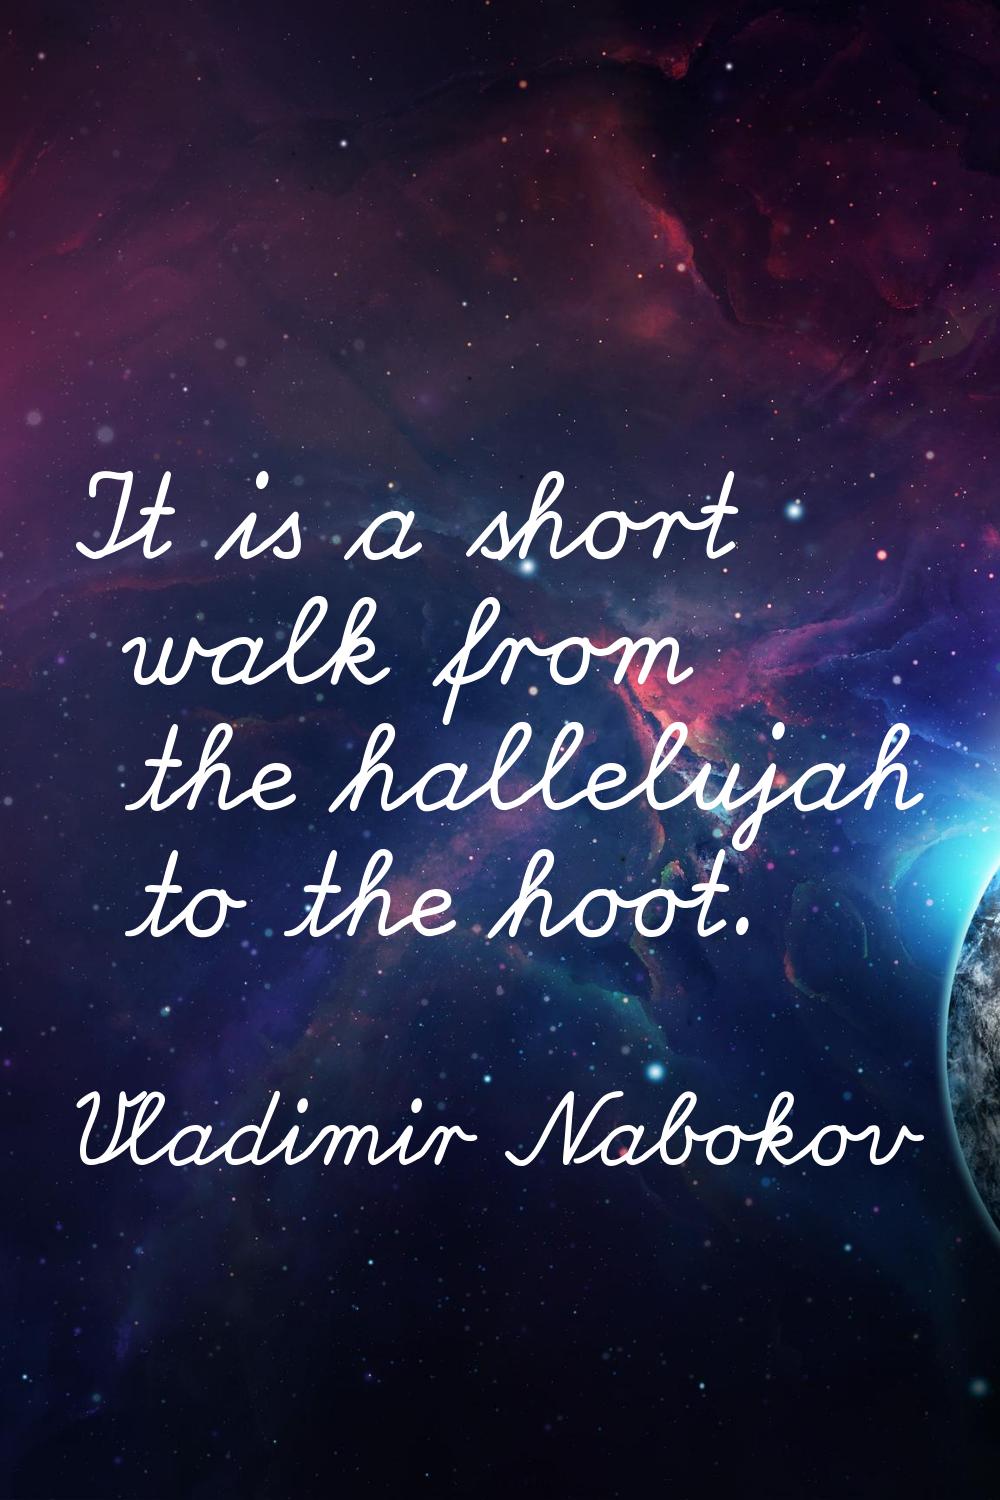 It is a short walk from the hallelujah to the hoot.